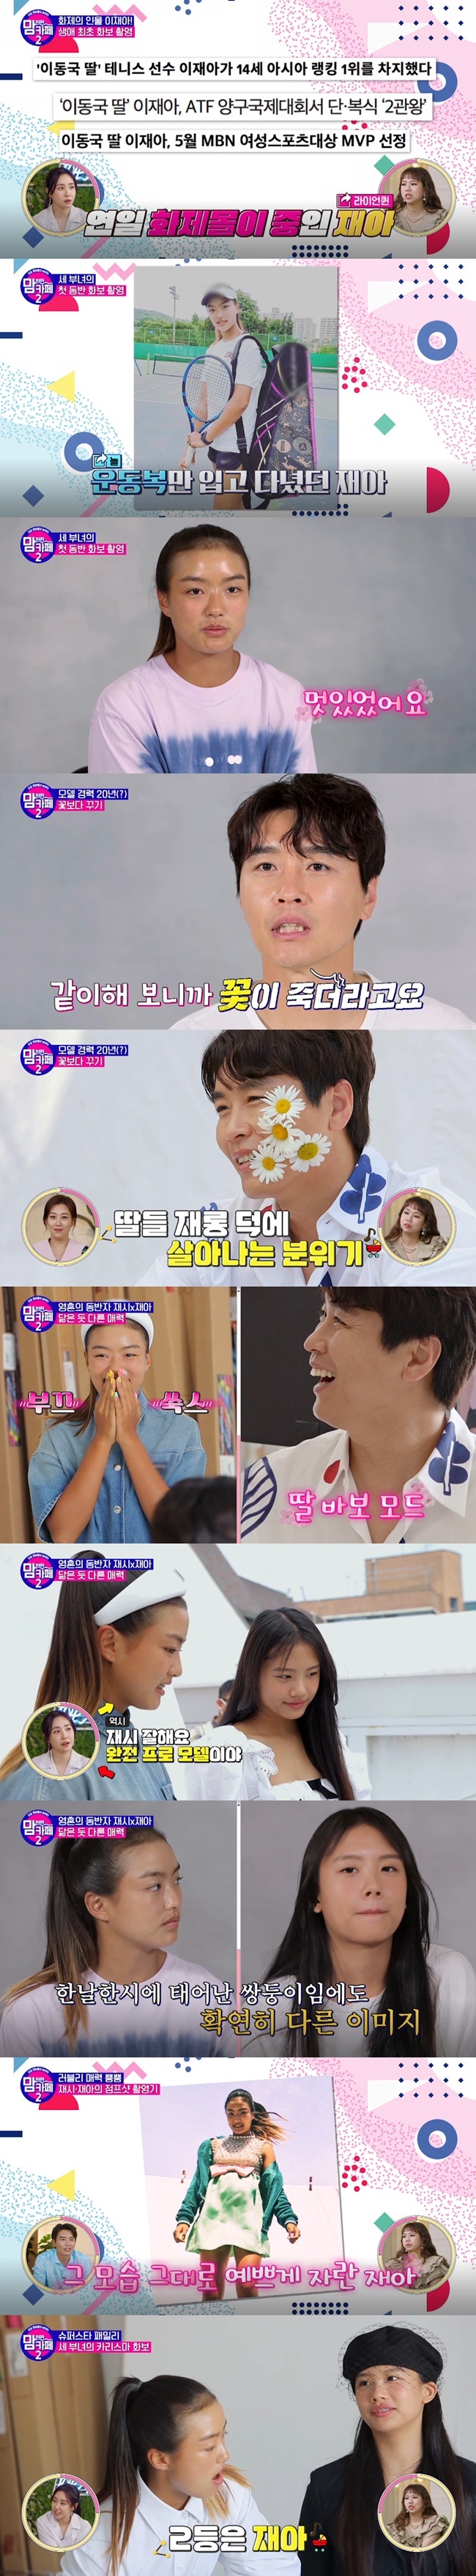 Lee Dong-gook, a soccer player, showed his daughters stupid side.On the Tcast E channel Mam-comfortable Cafe 2 (hereinafter referred to as Mam Cafe 2) broadcast on July 12, Lee Dong-gooks daughter Jash - Jaas magazine shooting scene was released.Earlier, Jae-a won two gold medals in the ATF Yanggu 14-year-old International Junior Tennis Tournament and doubles. Lee Dong-gook said, This time, two gold medals became a lot of issues.I was going to take a fashion magazine picture. Lee Dong-gook was made up for a photo shoot with daughters Jaa and Jash.Lee Dong-gook said, Father is expected to be with Jae-ah, and Jae-ah said, I do not do well in my skirt.Hoody and sometimes Blue jeans? I like to wear it comfortably. It is the first time I have taken a picture, so I have a lot of expectations and tension. Lee Dong-gook, who saw Jae-ahs makeup, showed a like Ariana Grande in a foreign country.Jash, who saw Lee Dong-gook in costume, laughed, Its like a rich father. Lee Dong-gook burned his will, saying, Its about getting a life shot here.Lee Dong-gook used two cute flowers to film: I thought this would fit in with me, and when I did it, the flowers died.It was better than I thought, she quivered numbly.Jacqui came out wearing a short croppie with Blue Jeans and Jacquitous jumpsuit.I was having fun with my eyes because I saw my kids costumes wearing something they didnt wear really normally, recalled Lee Dong-gook, whose accompanying shoots of Jash and Jaa followed.Lee Dong-gook said, It was amazing to have two different images in one picture, and I was surprised to see how it could be so different from the same daughter.Im not good at wearing the same clothes these days because I have a different style from Jash and me, and it was good to wear twin looks, Jaea said.Jae-a was cheered by everyone with a dress. Lee Dong-gook said, When I was a child, my face comes out. I also wore training suits during my school days.I was used to that style, and when I wore a different dress, I was pretty because I was the first to see her. After finishing the photo shoot, Lee Dong-gook said, It is hard to be alone, but I do not know that it is hard because I am with my children. Jash said, It was so fun and glorious.